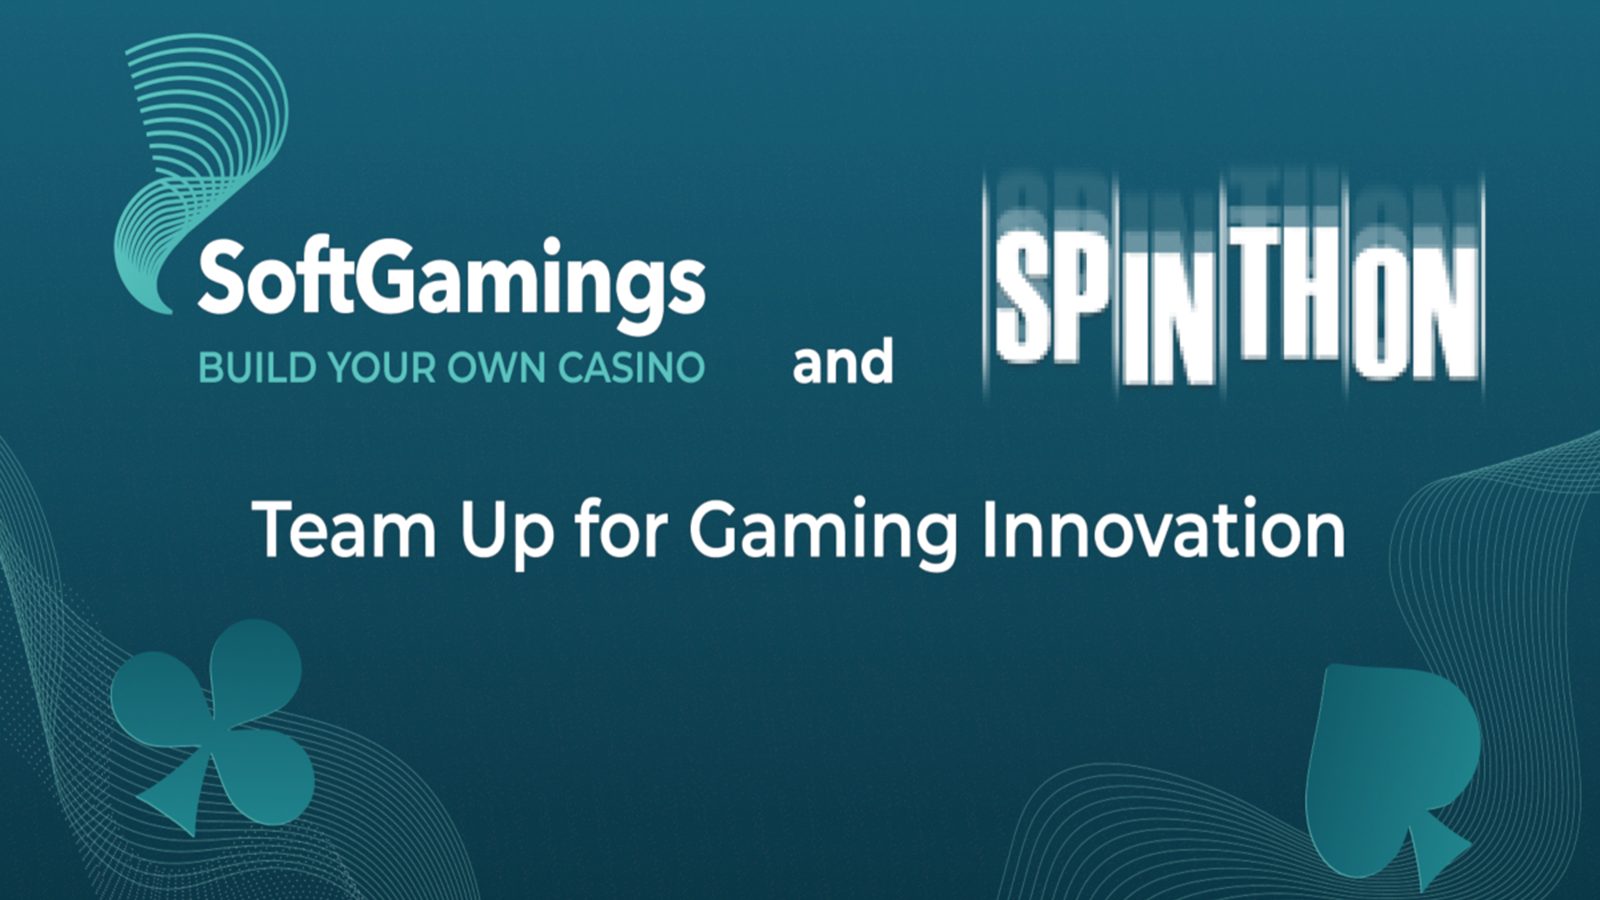 Spinthon and SoftGamings Unite for iGaming